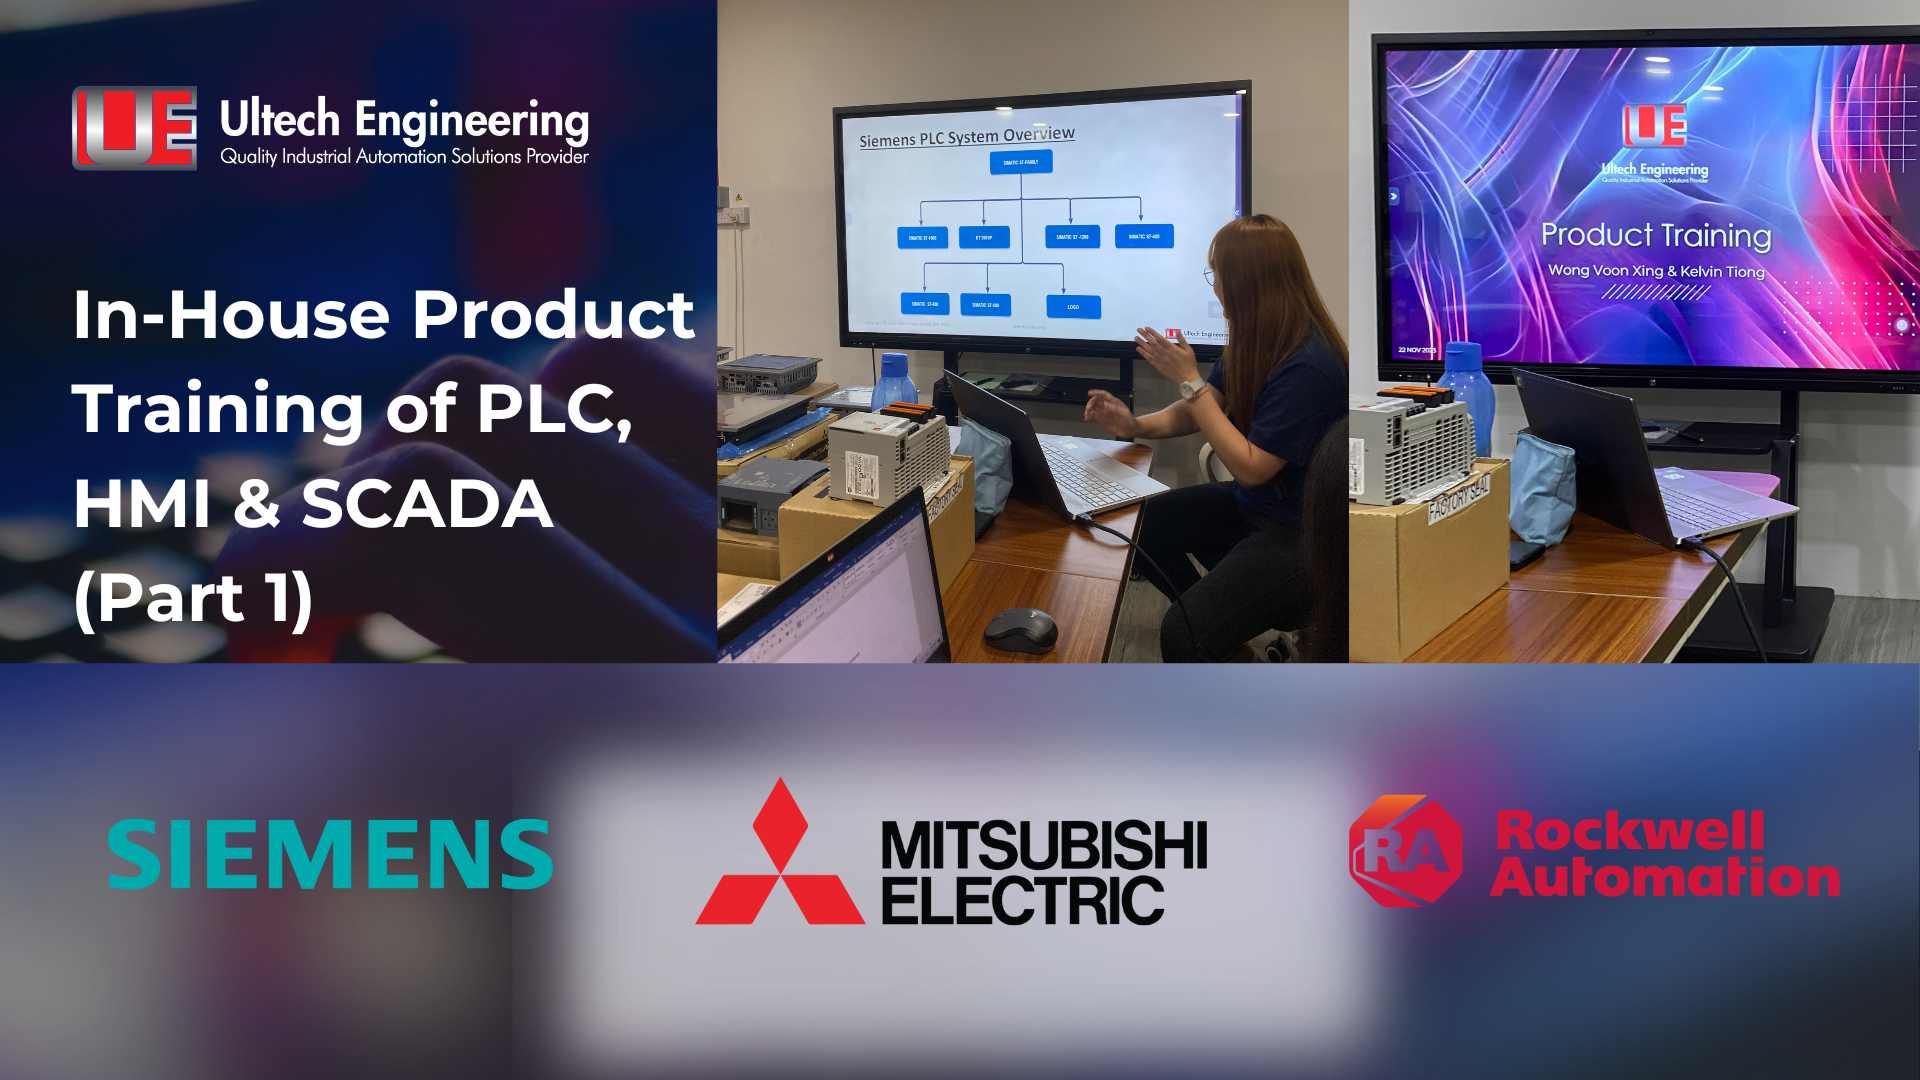 In-House Product Training of PLC, HMI & SCADA by Ultech Engineering (Part 1)